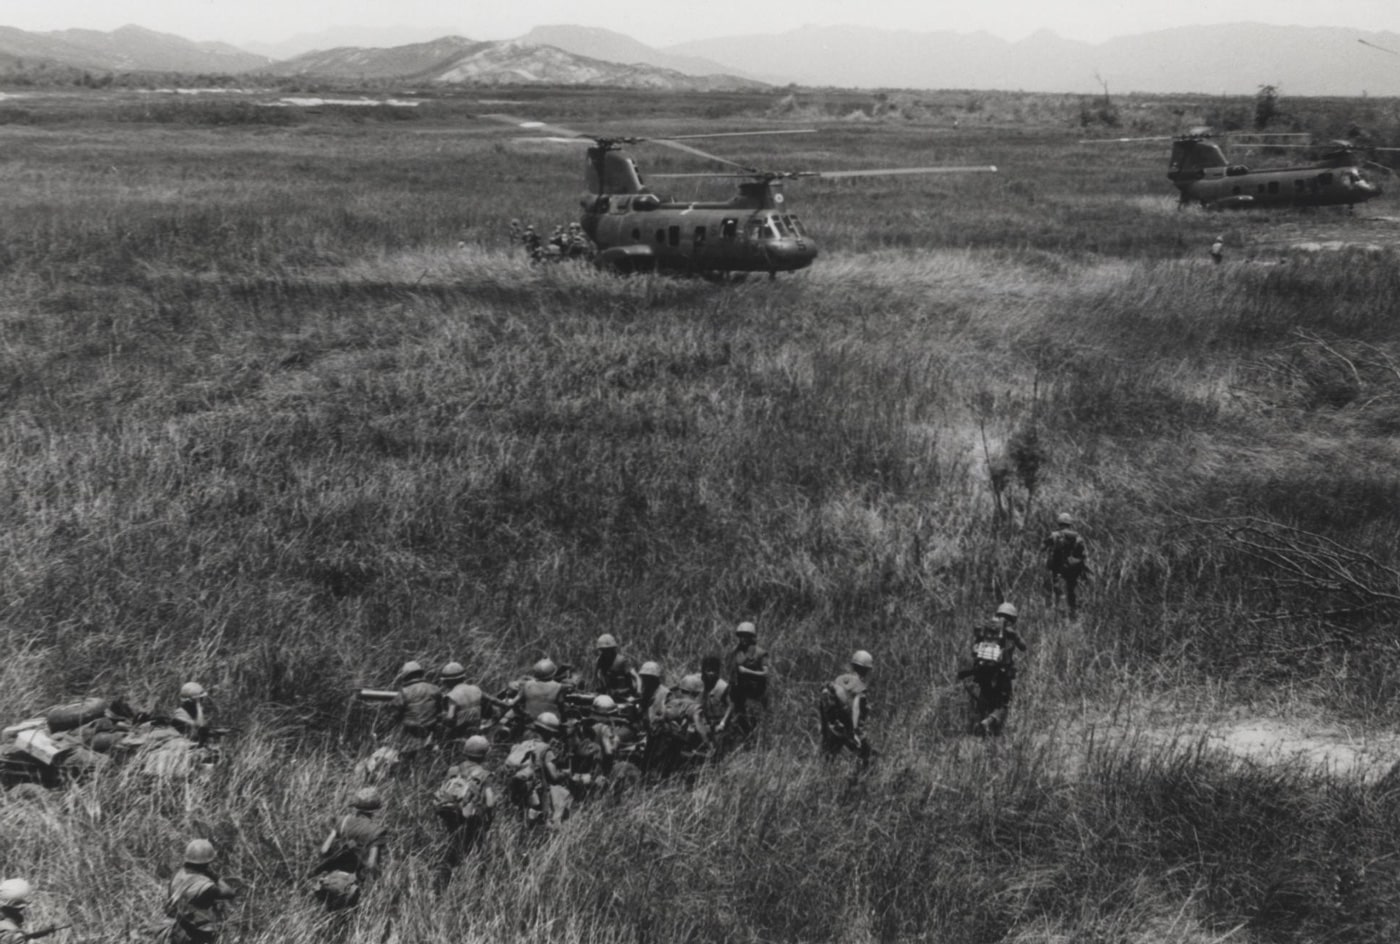 In this photo, ROK Marines load onto CH-46 helicopters in a grassy field. 	The Boeing Vertol CH-46 Sea Knight is an American medium-lift tandem-rotor transport helicopter powered by twin turboshaft engines. It was designed by Vertol and manufactured by Boeing Vertol following Vertol's acquisition by Boeing. Development of the Sea Knight, which was originally designated by the firm as the Vertol Model 107, commenced during 1956.